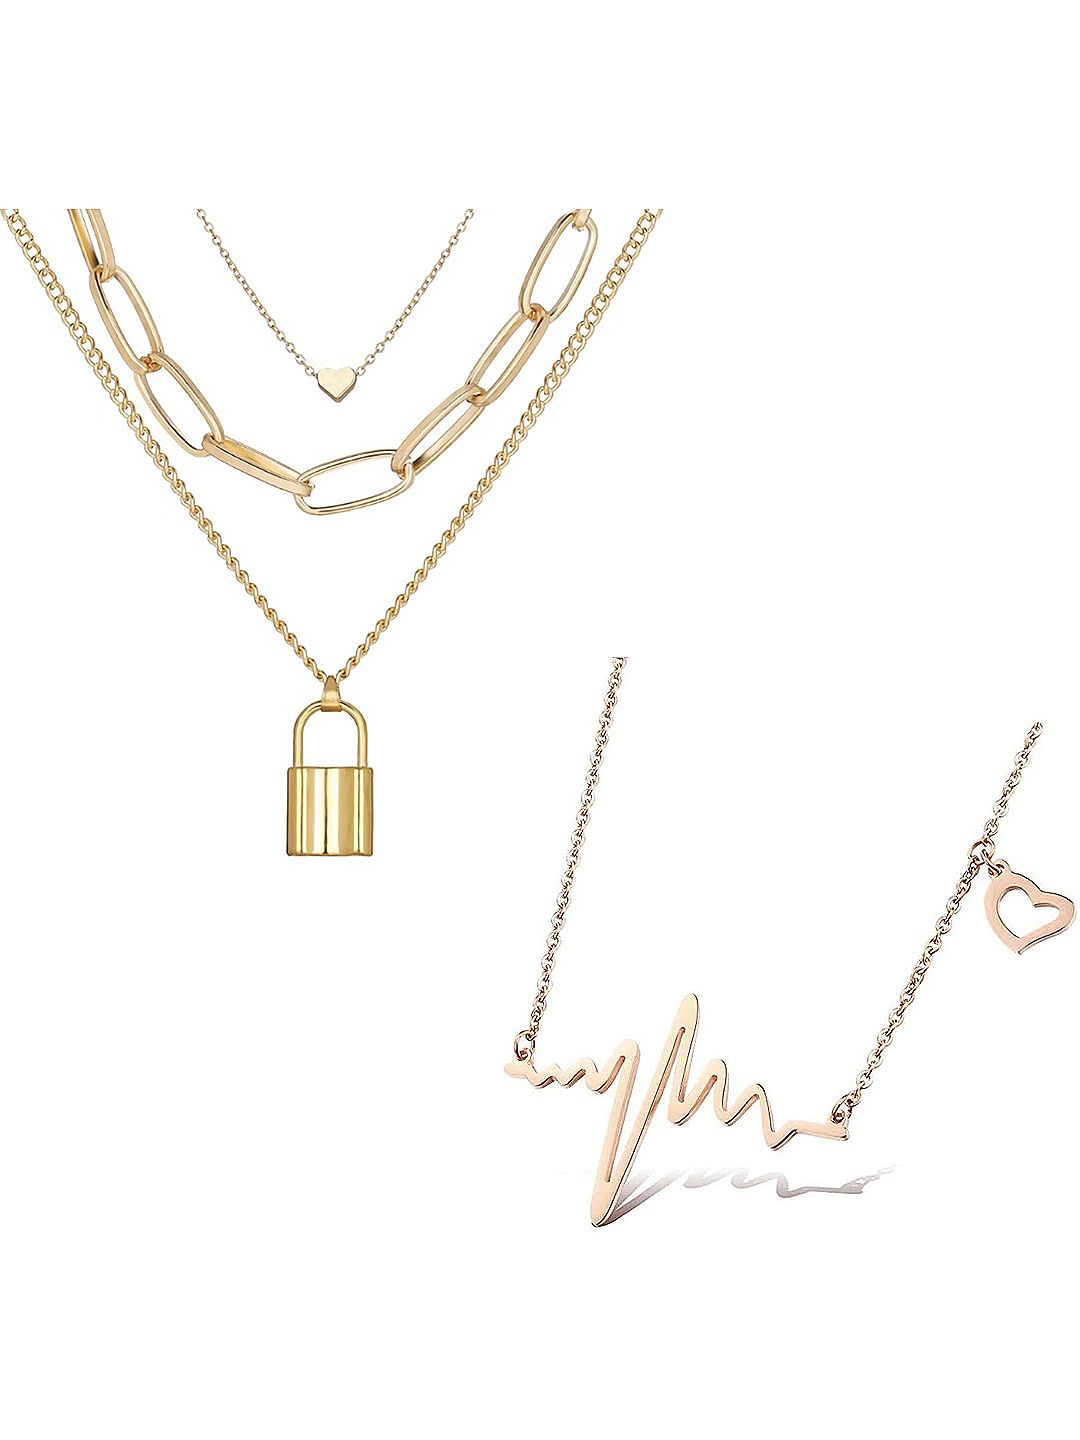 Vembley Set Of 2 Gold-Plated Layered Heartbeat & Lock Heart Pendant Necklace Price in India